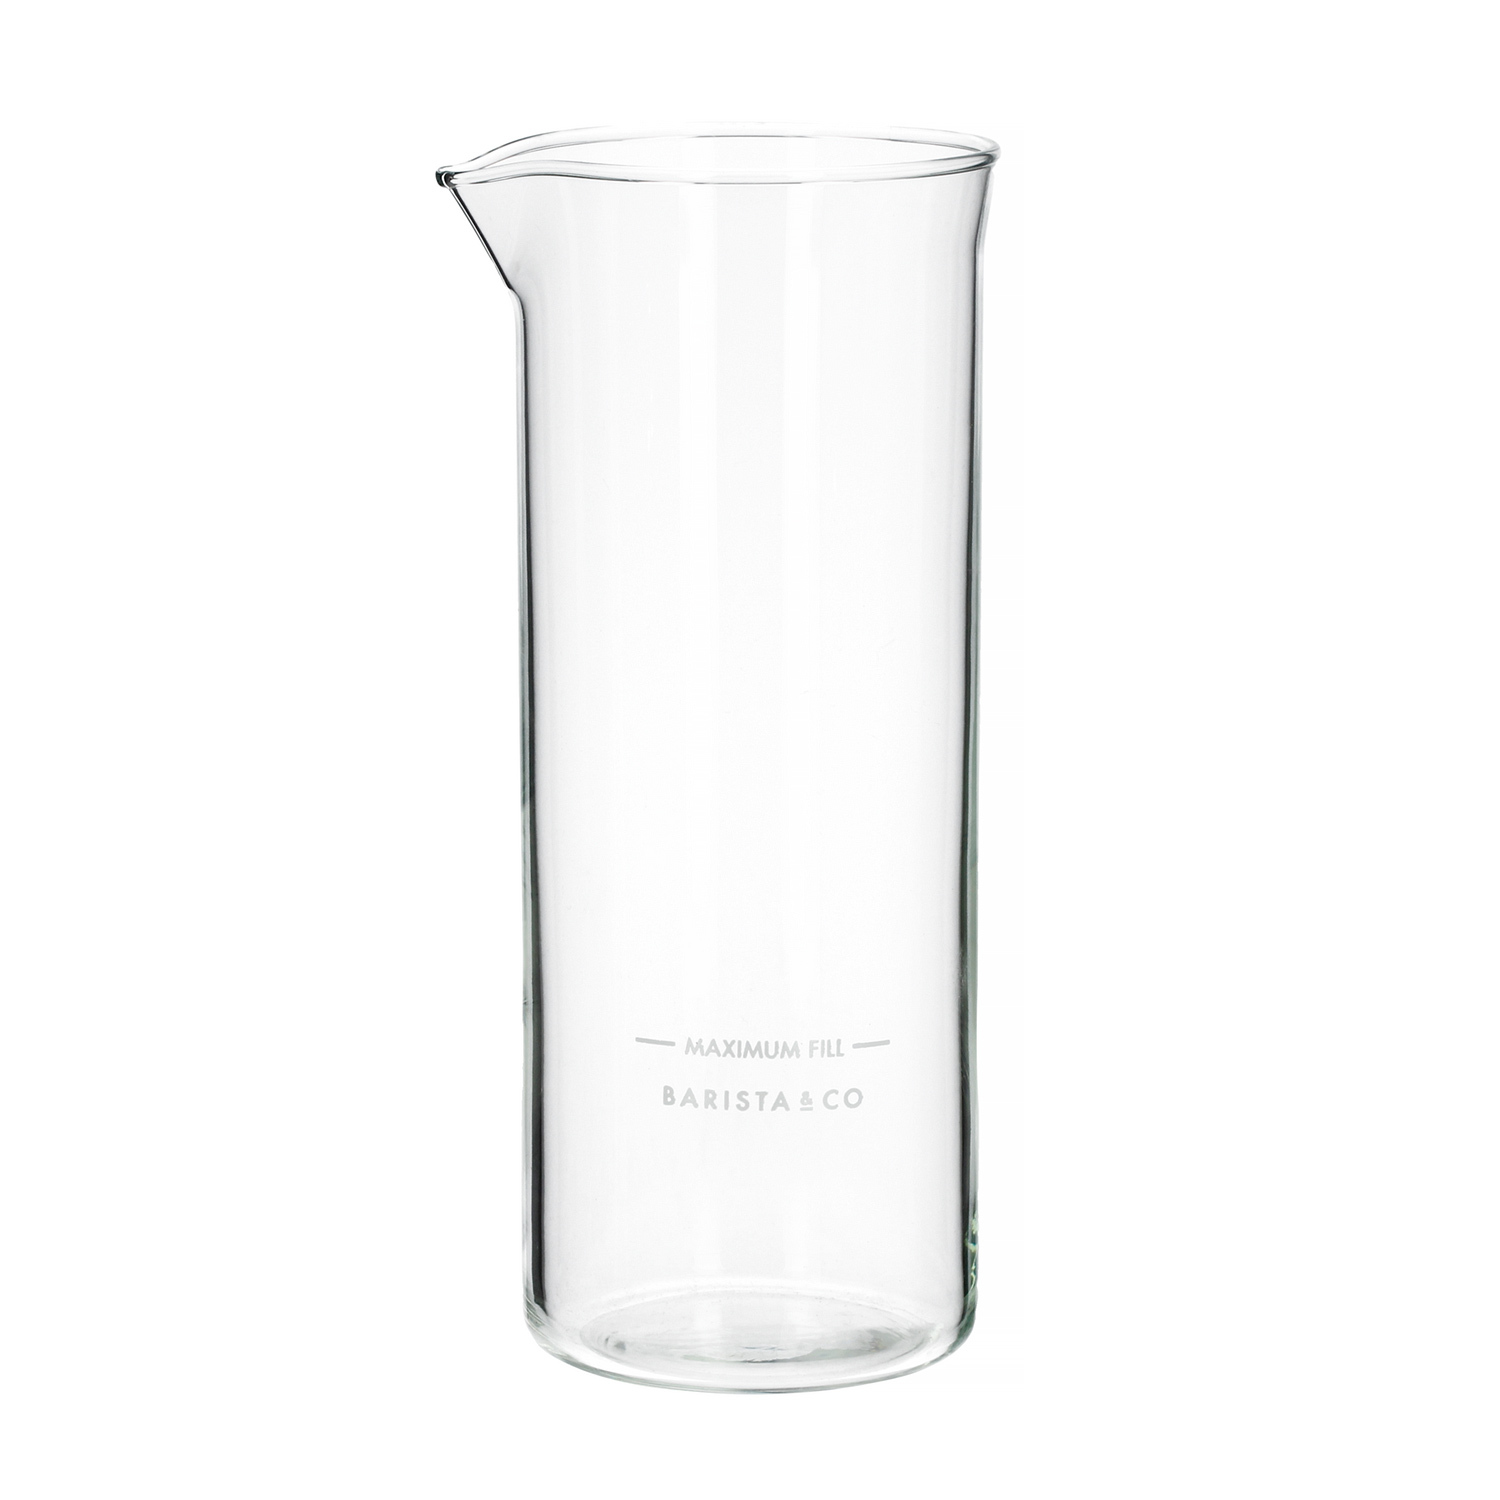 Barista & Co - Milk Frother Glass Refill